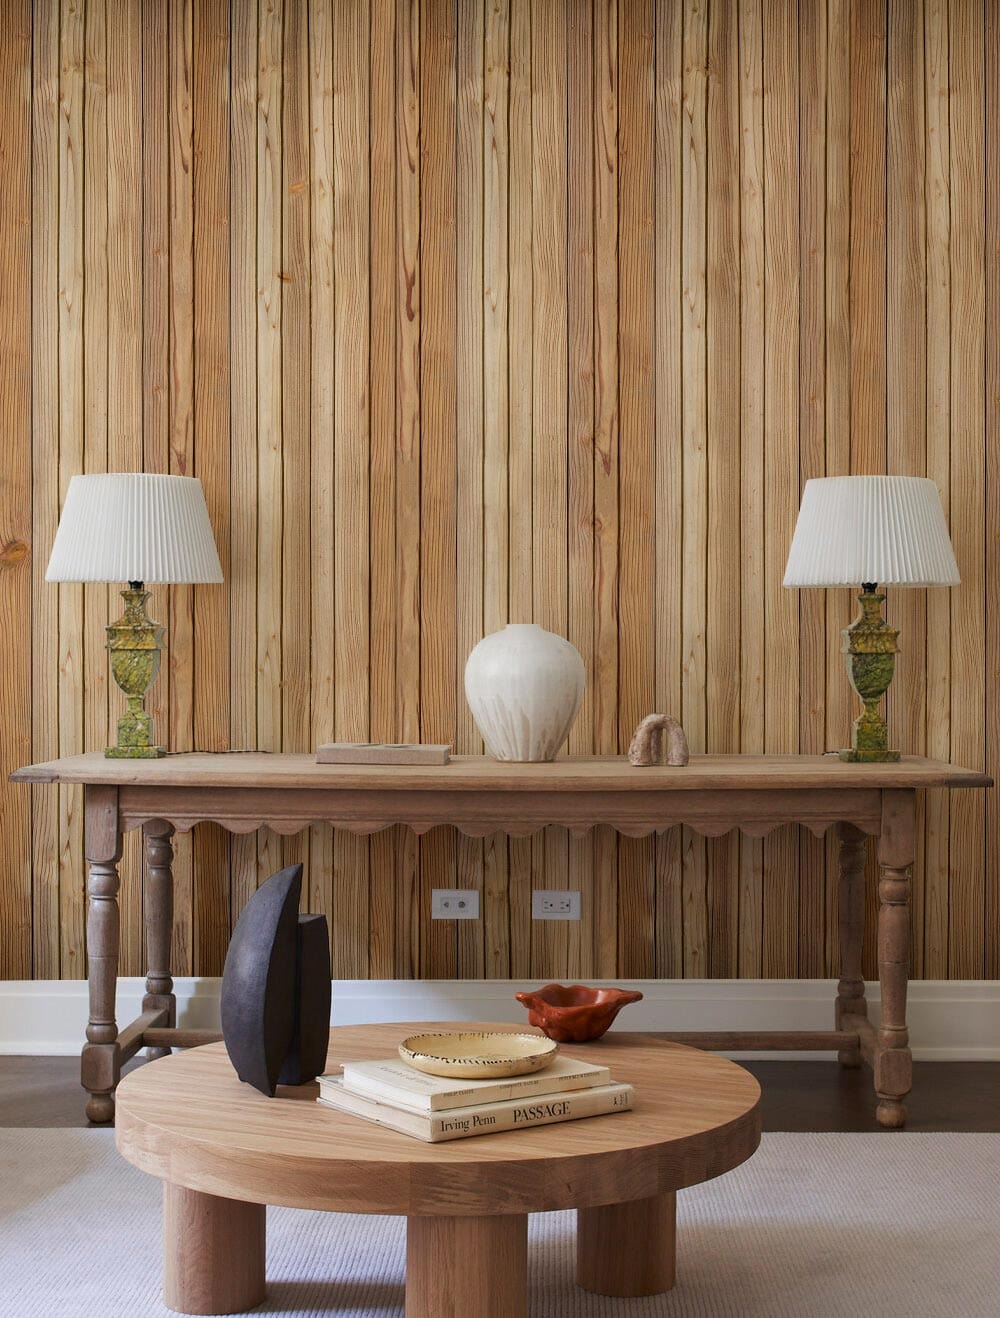 The natural color of wood was used to create these bespoke wood effect hallway wall murals.